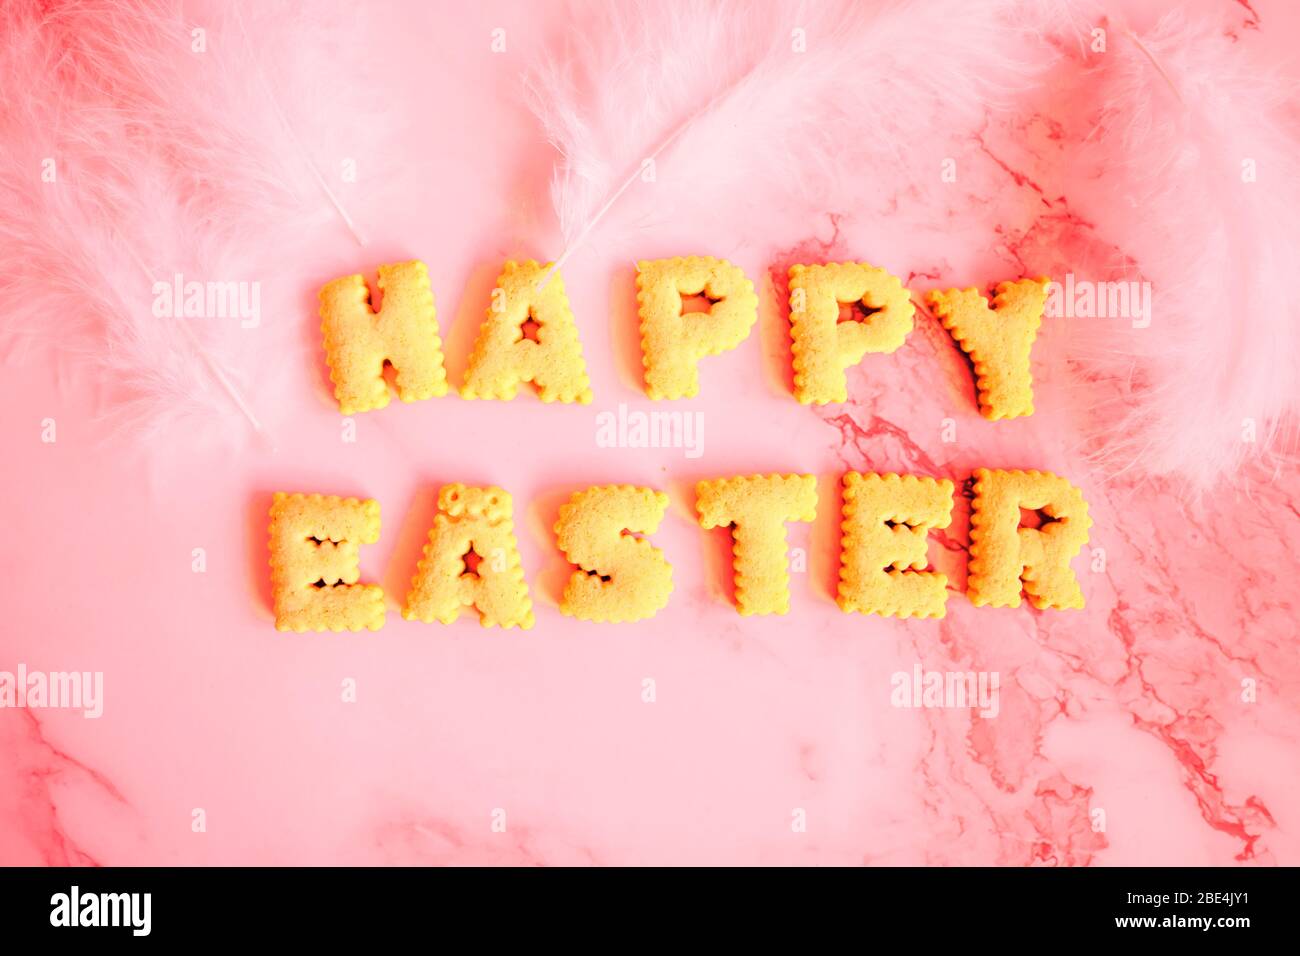 Top view of yellow eggs in carton boxes and on wicker kitchen stand, white feathers, lettering from cookies in shape of letters on marble table. Rusti Stock Photo